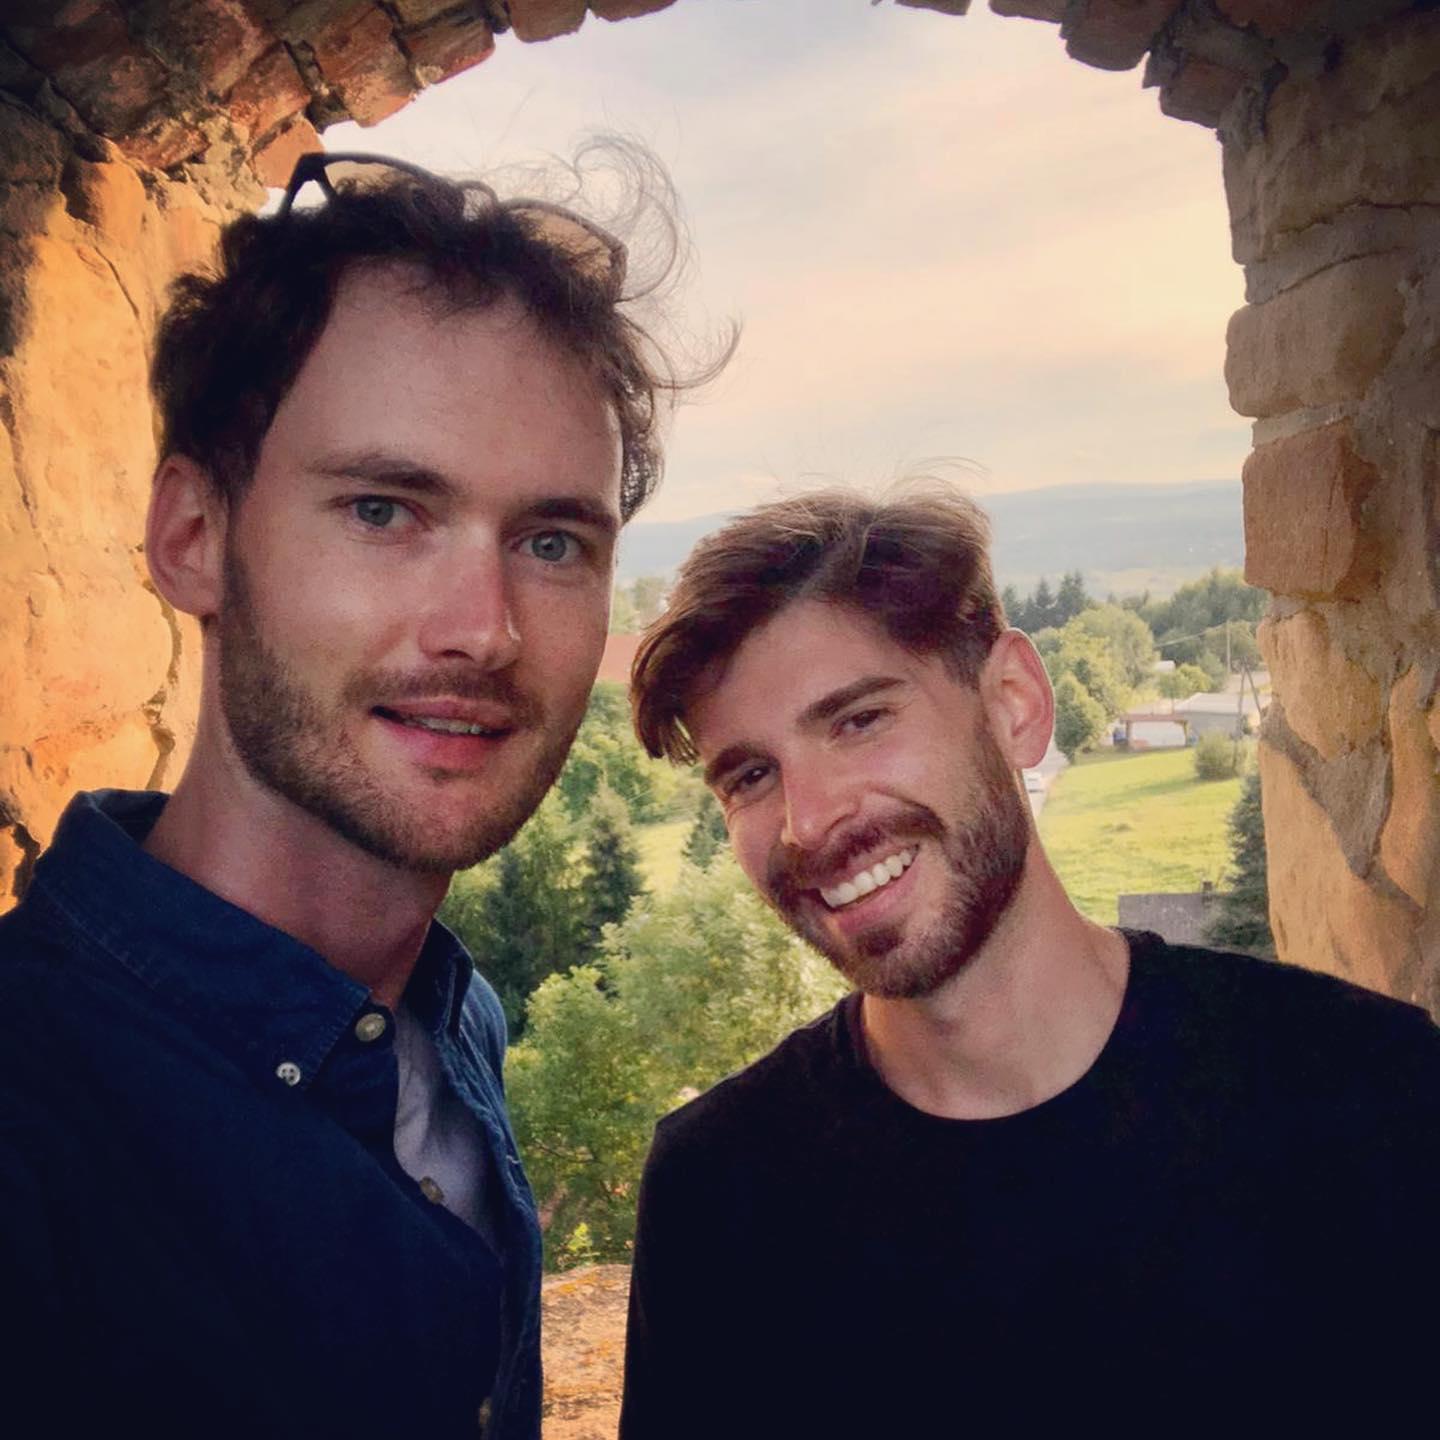 selfie at the castle on a mountain near Kuba's family home, 2021